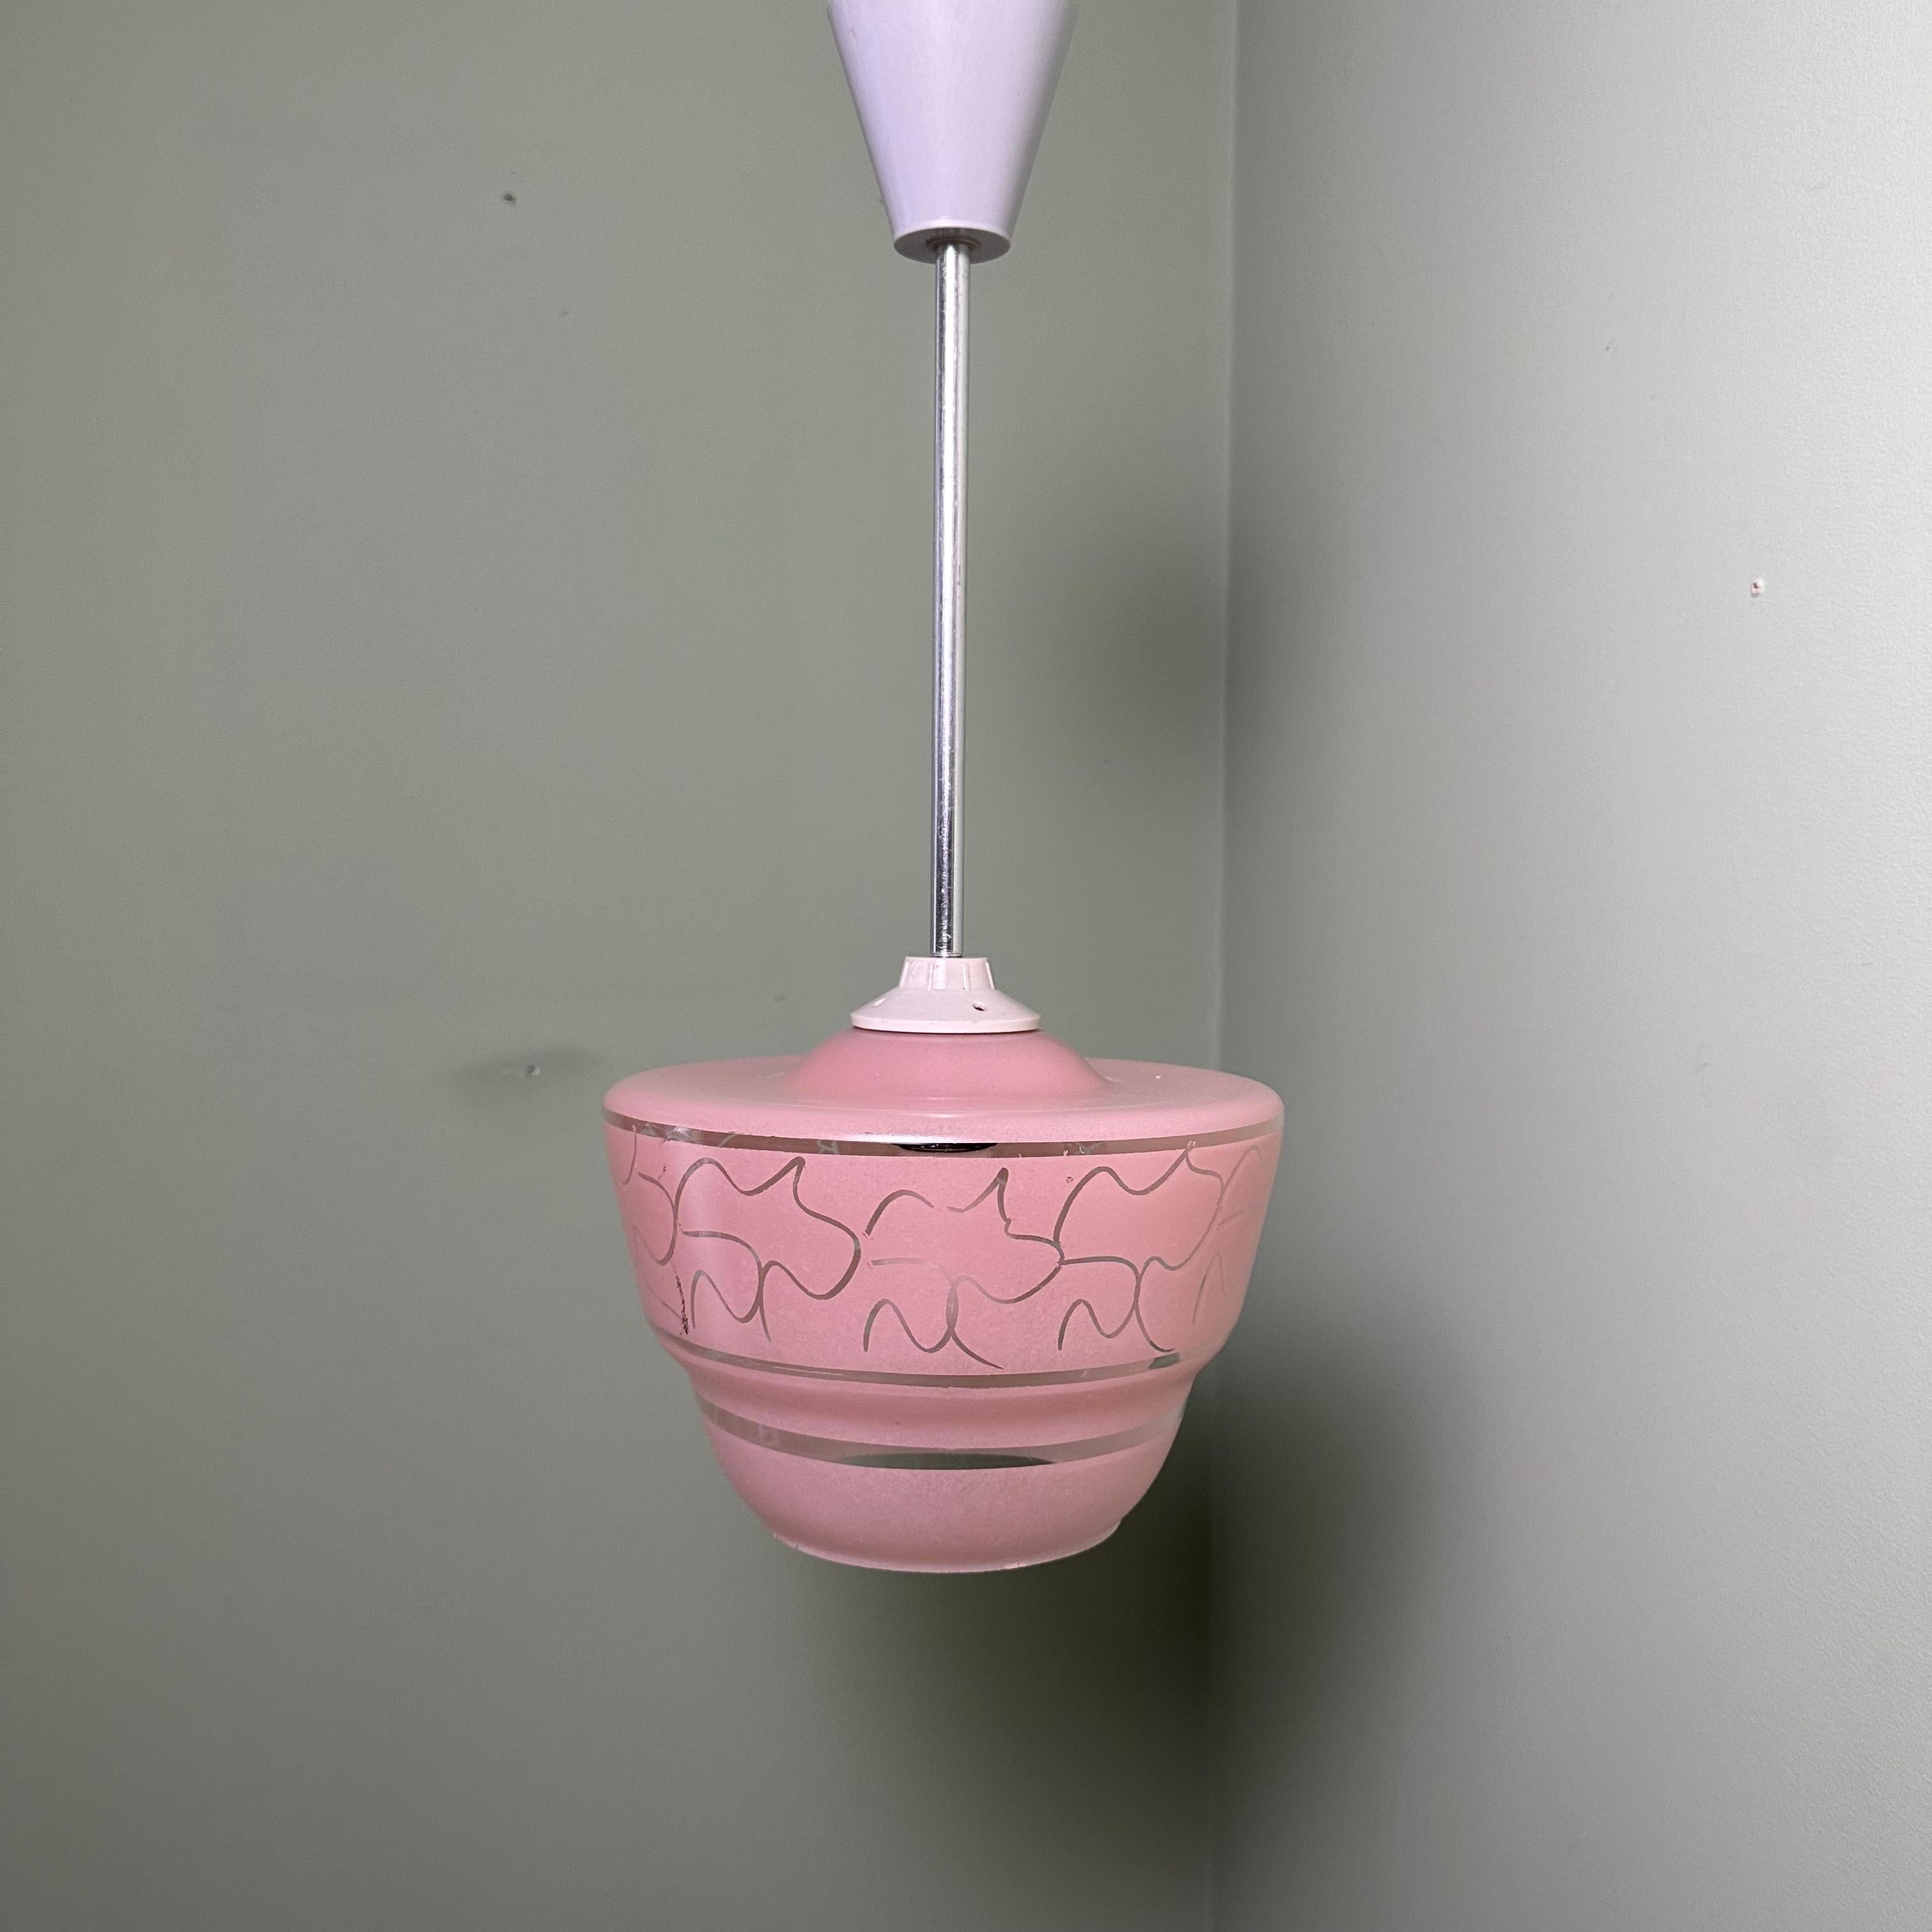 European Pink Vintage Glass Ceiling Pendant with Etched Pattern For Sale